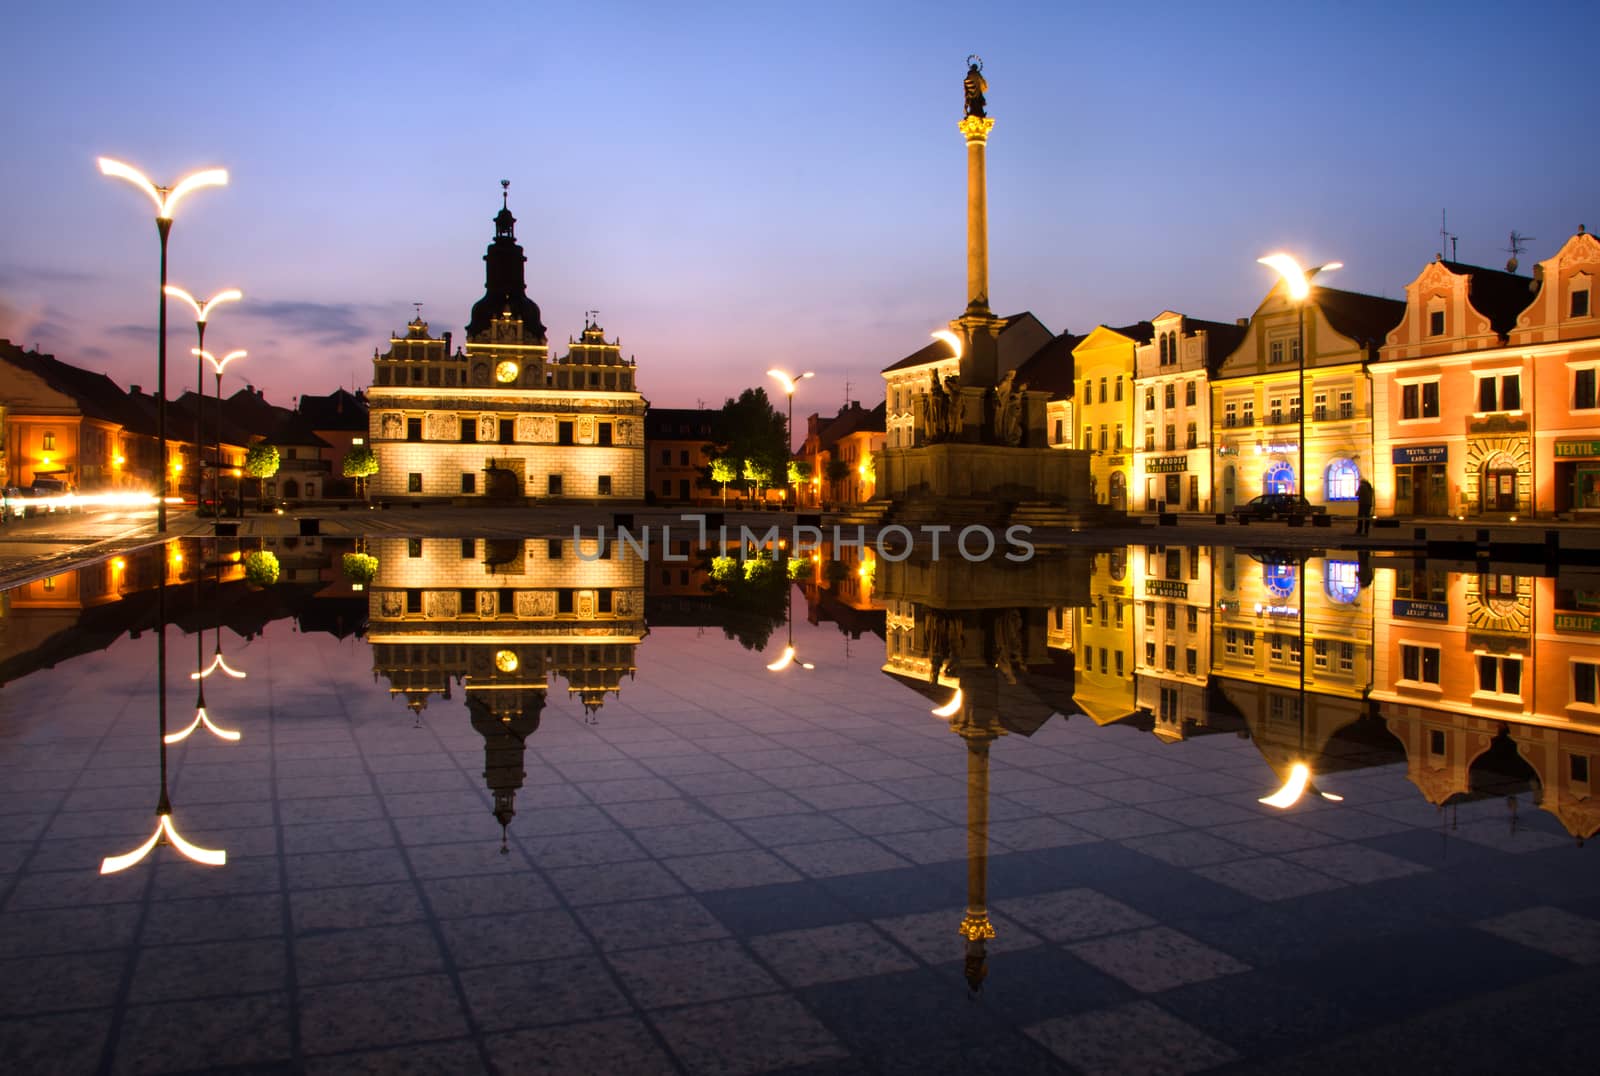 Town square at night and reflection in the water.